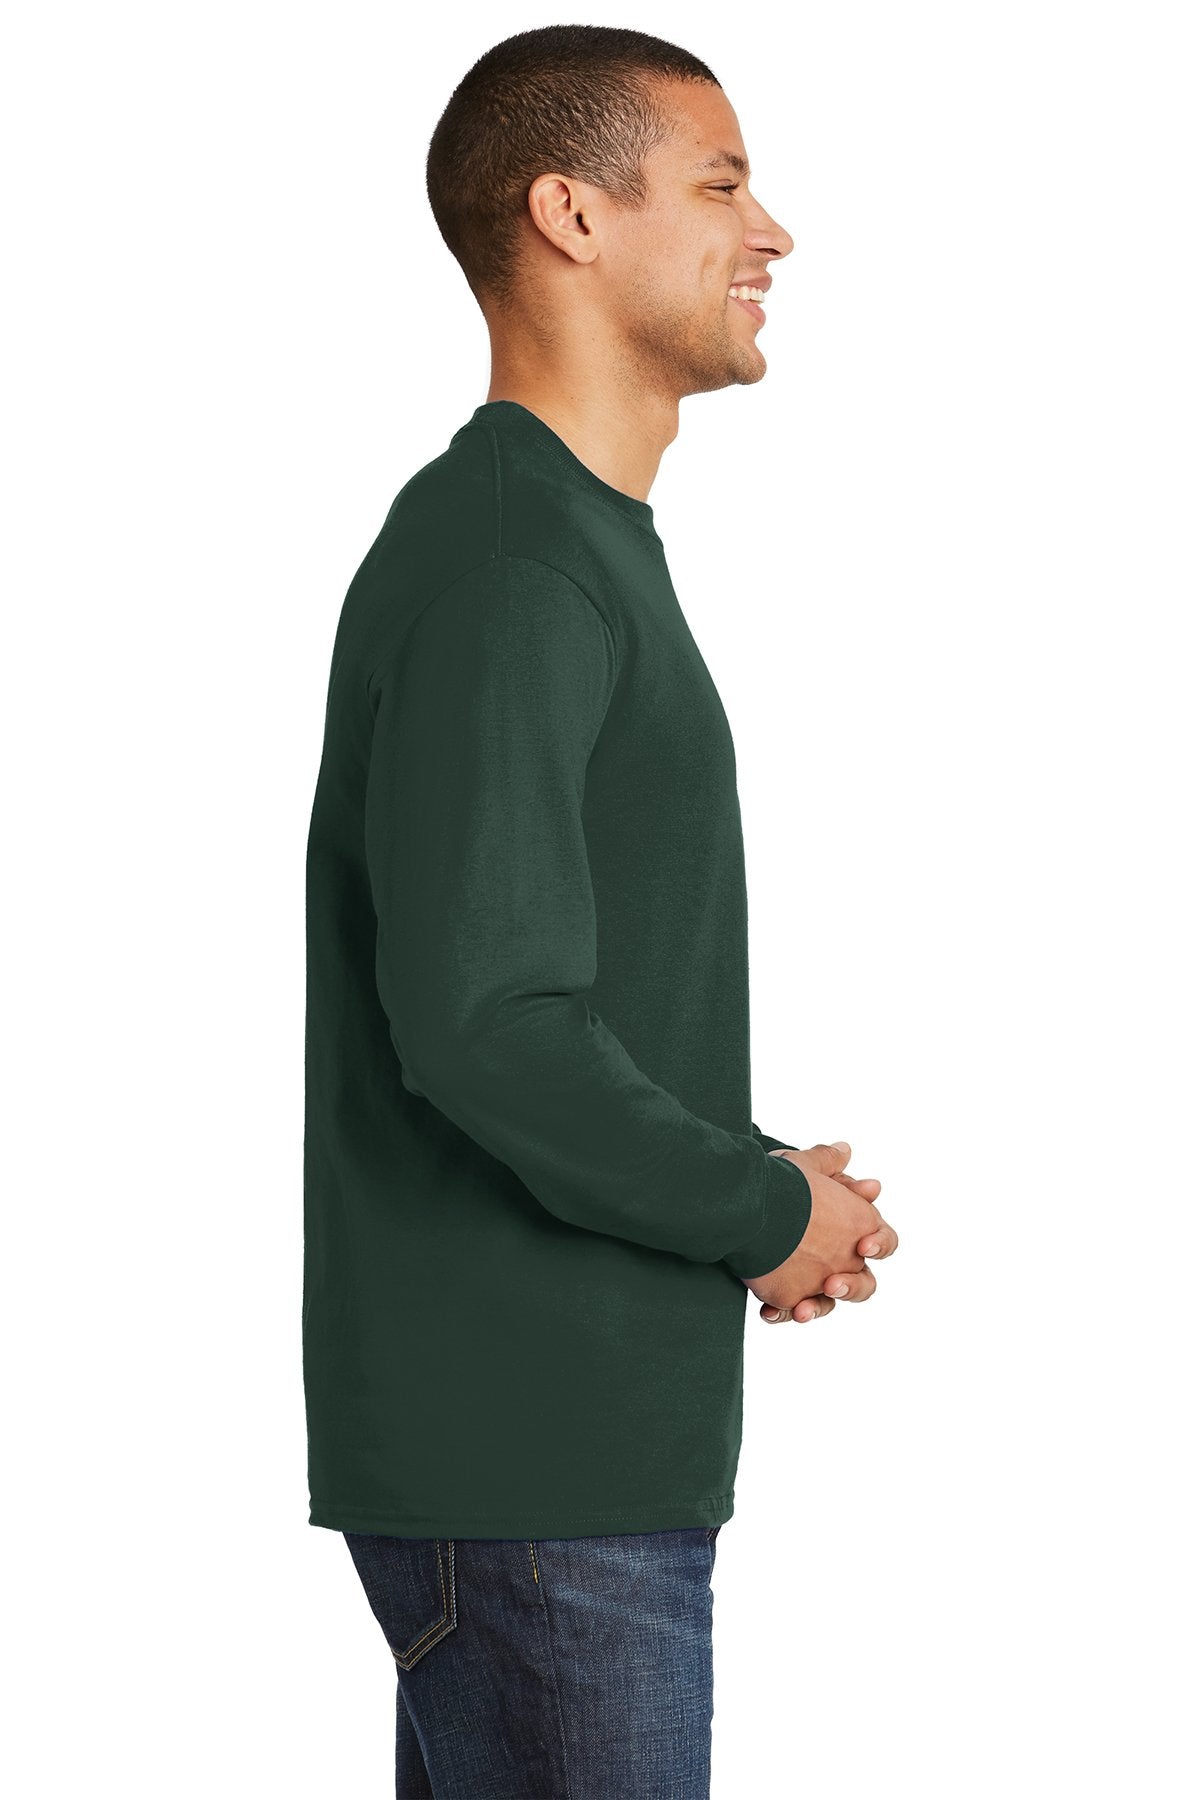 hanes beefy t cotton long sleeve t shirt 5186 deep forest